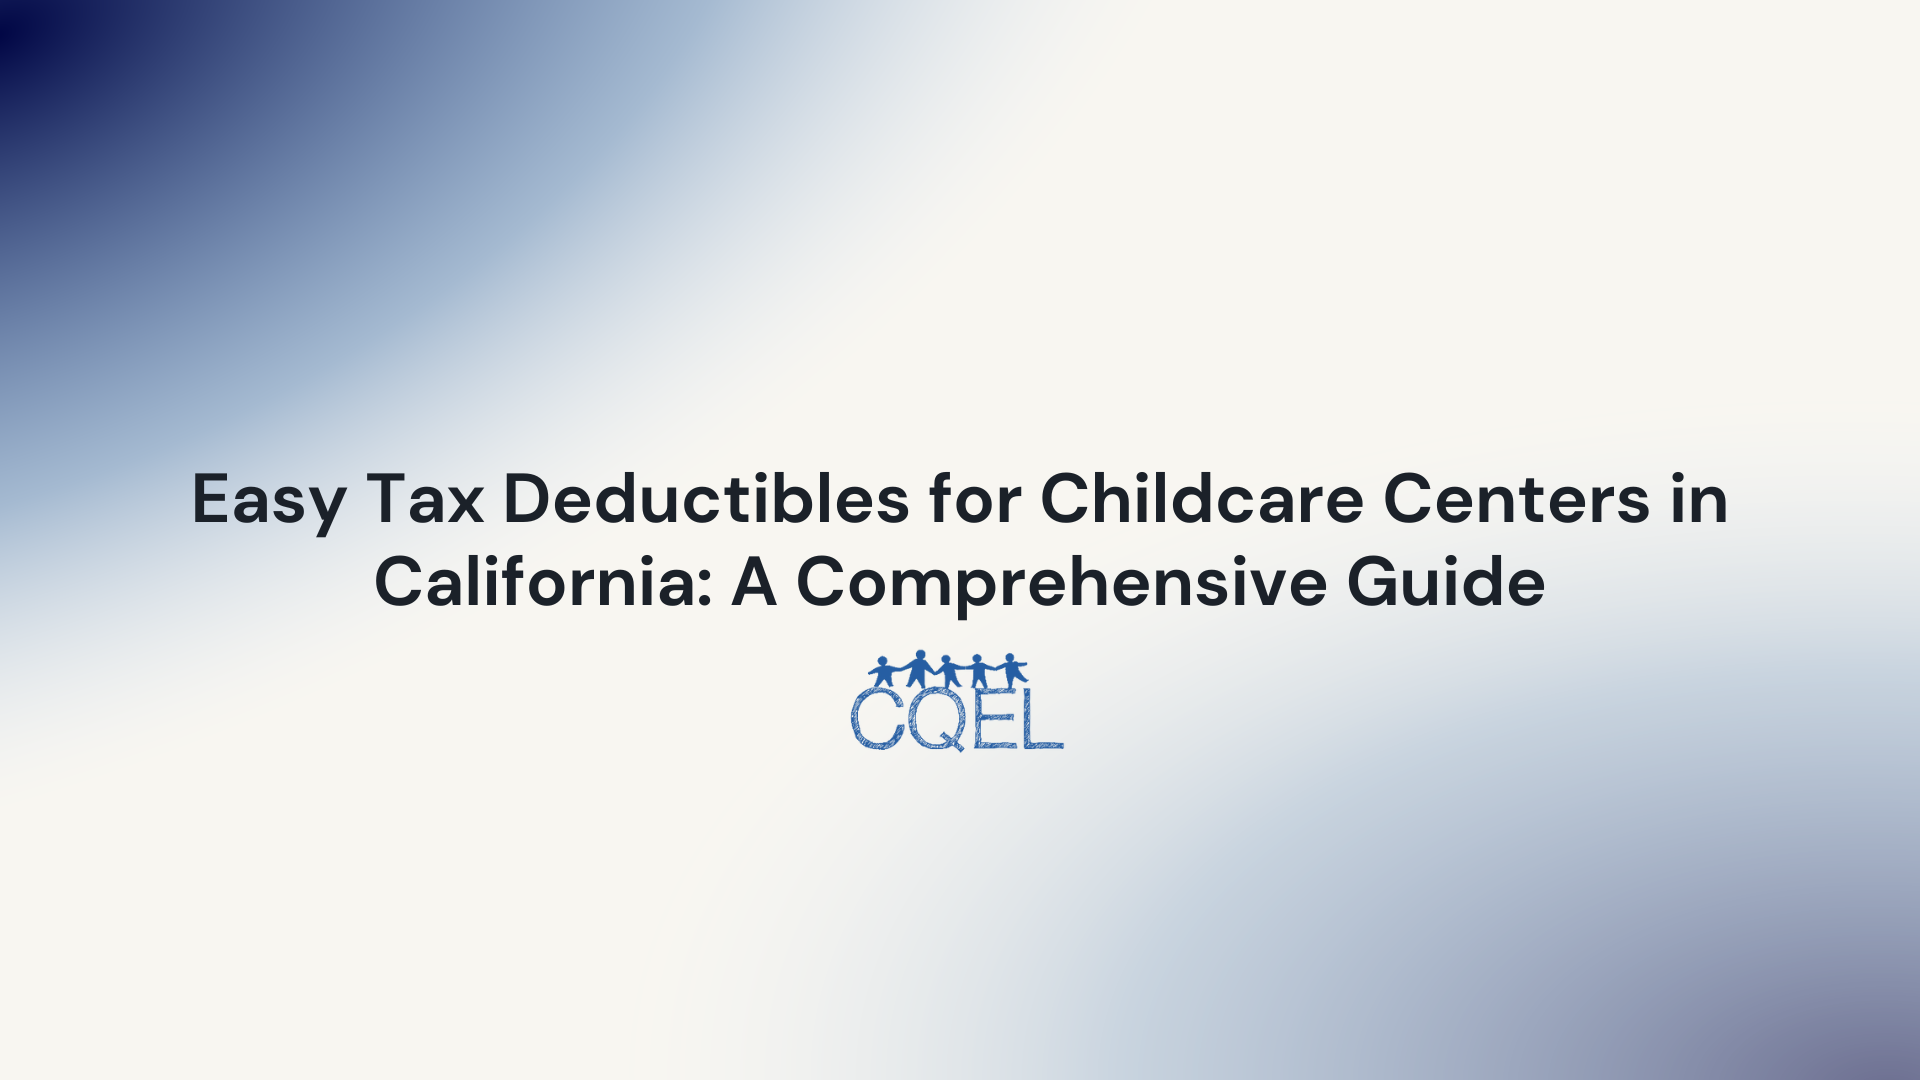 Easy Tax Deductibles for Childcare Centers in California: A Comprehensive Guide